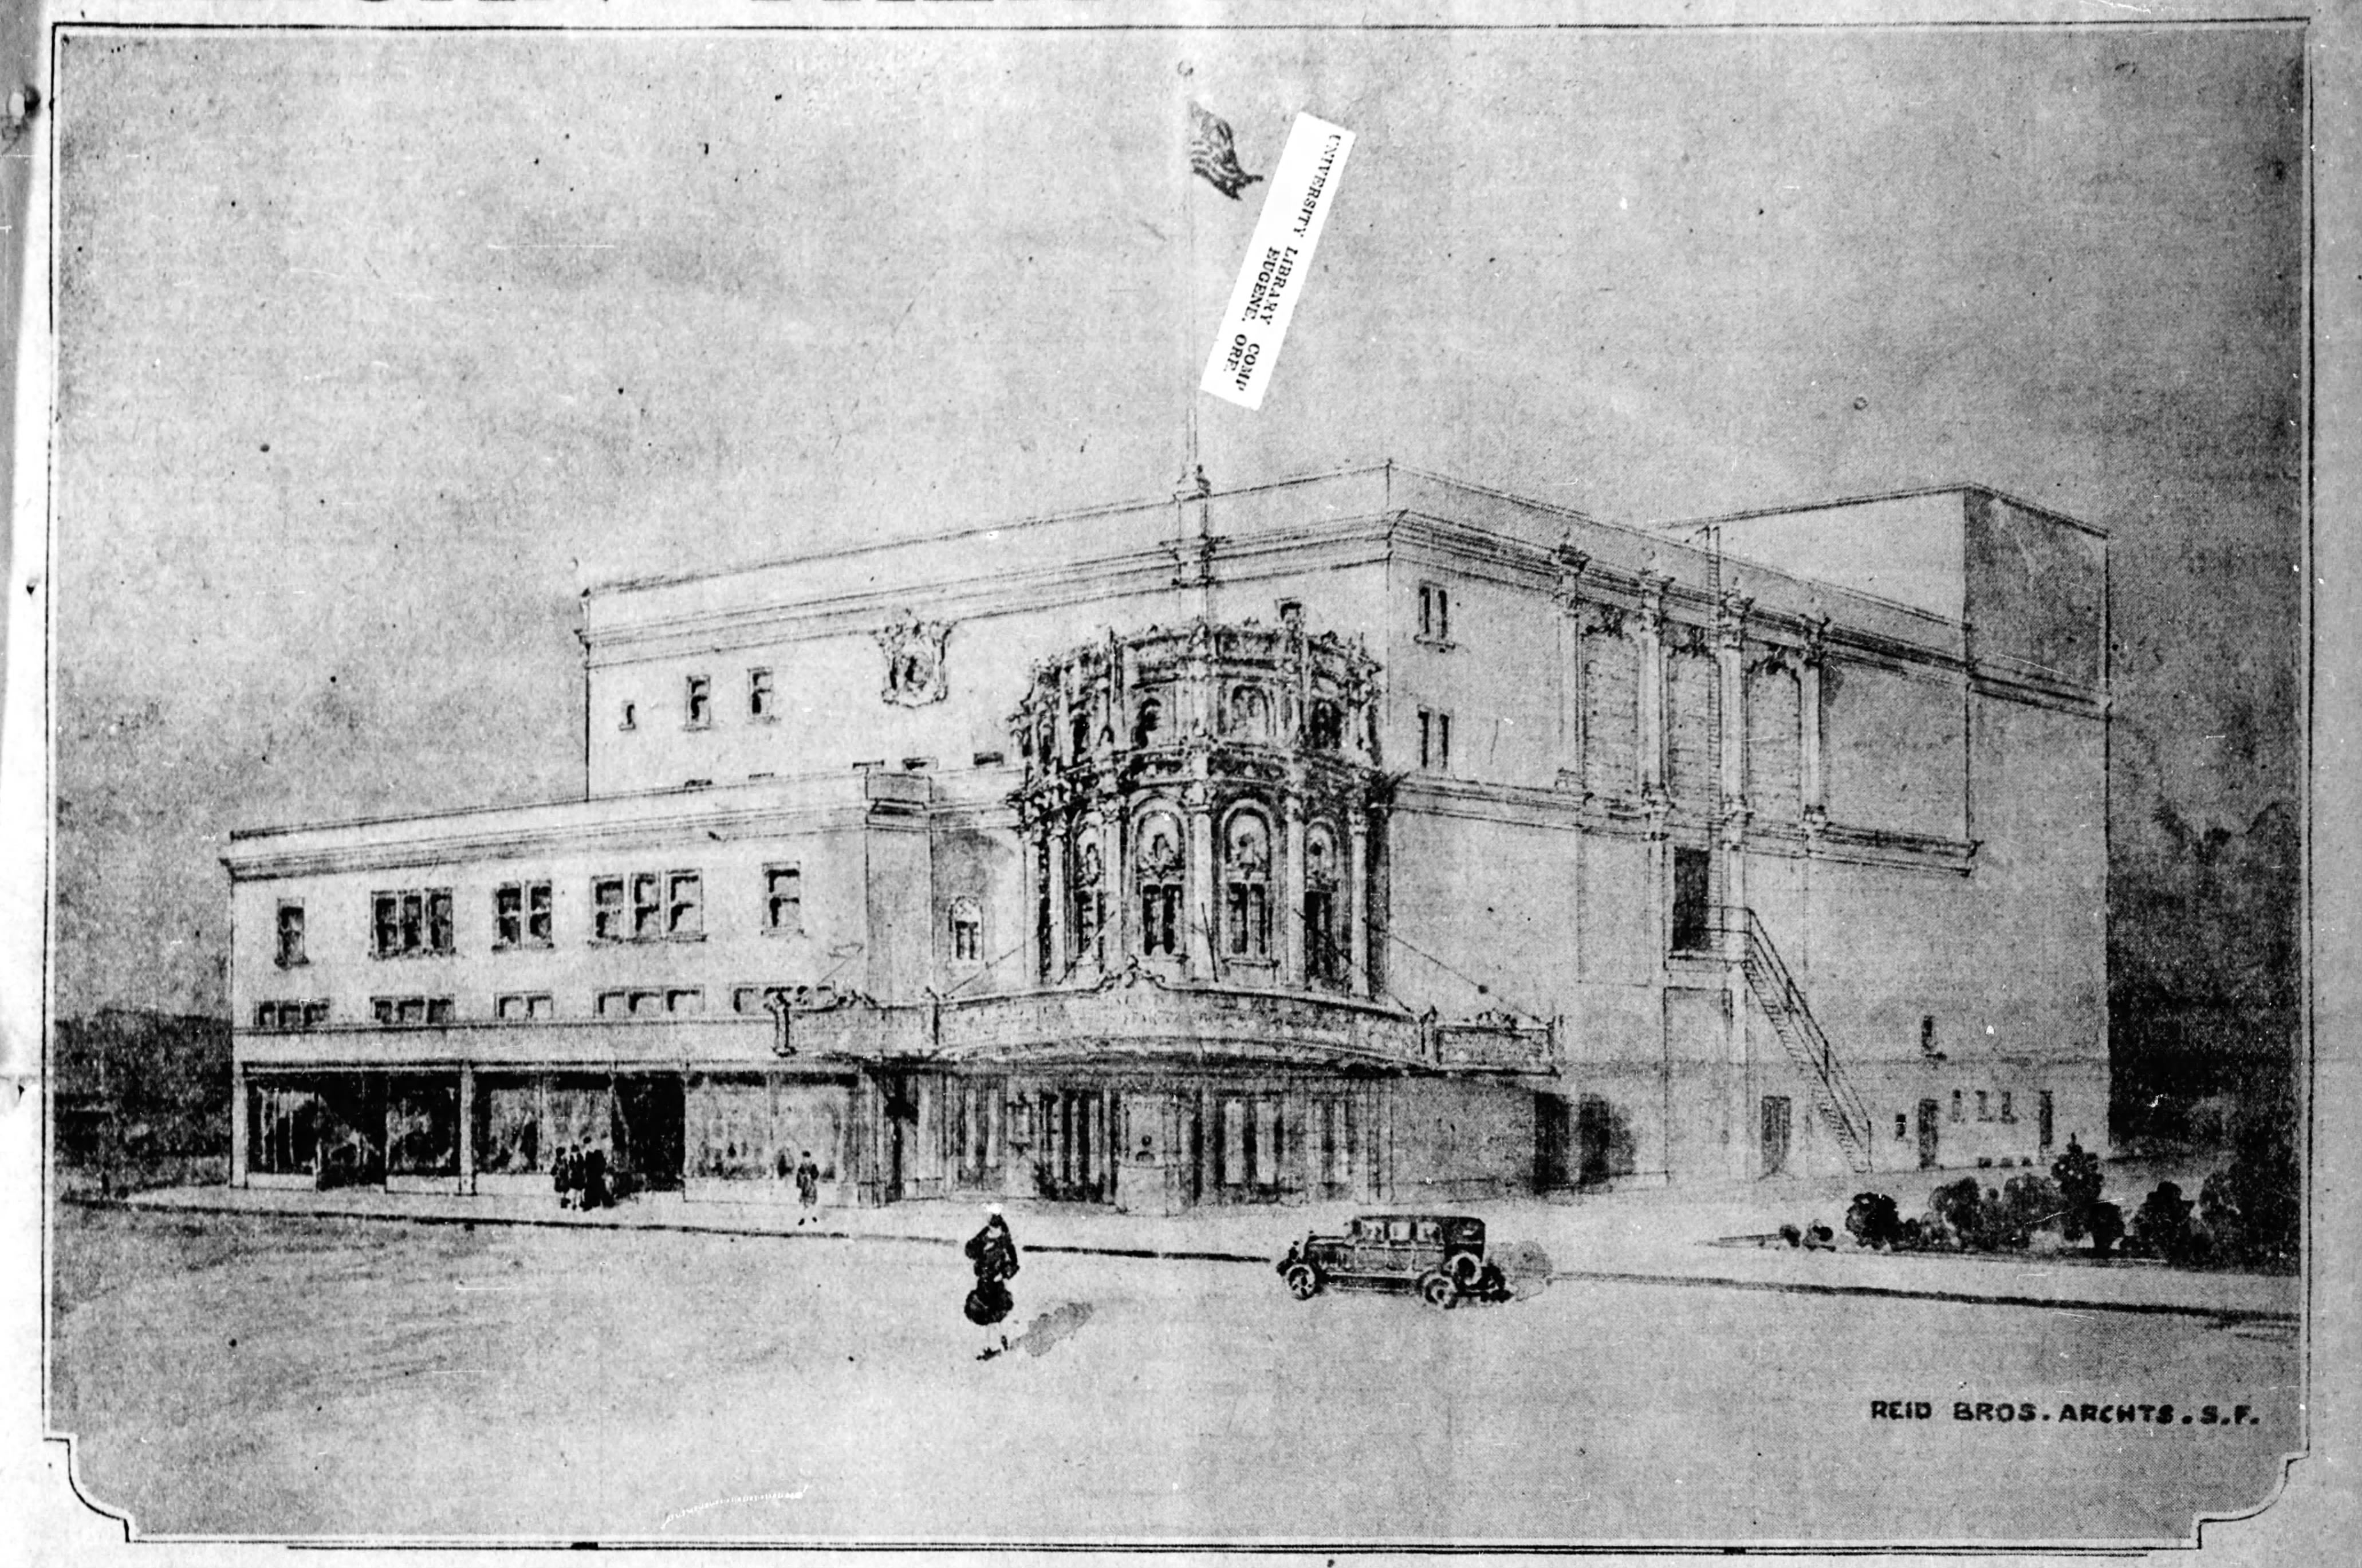 Exterior of the Pelican theater, 1929